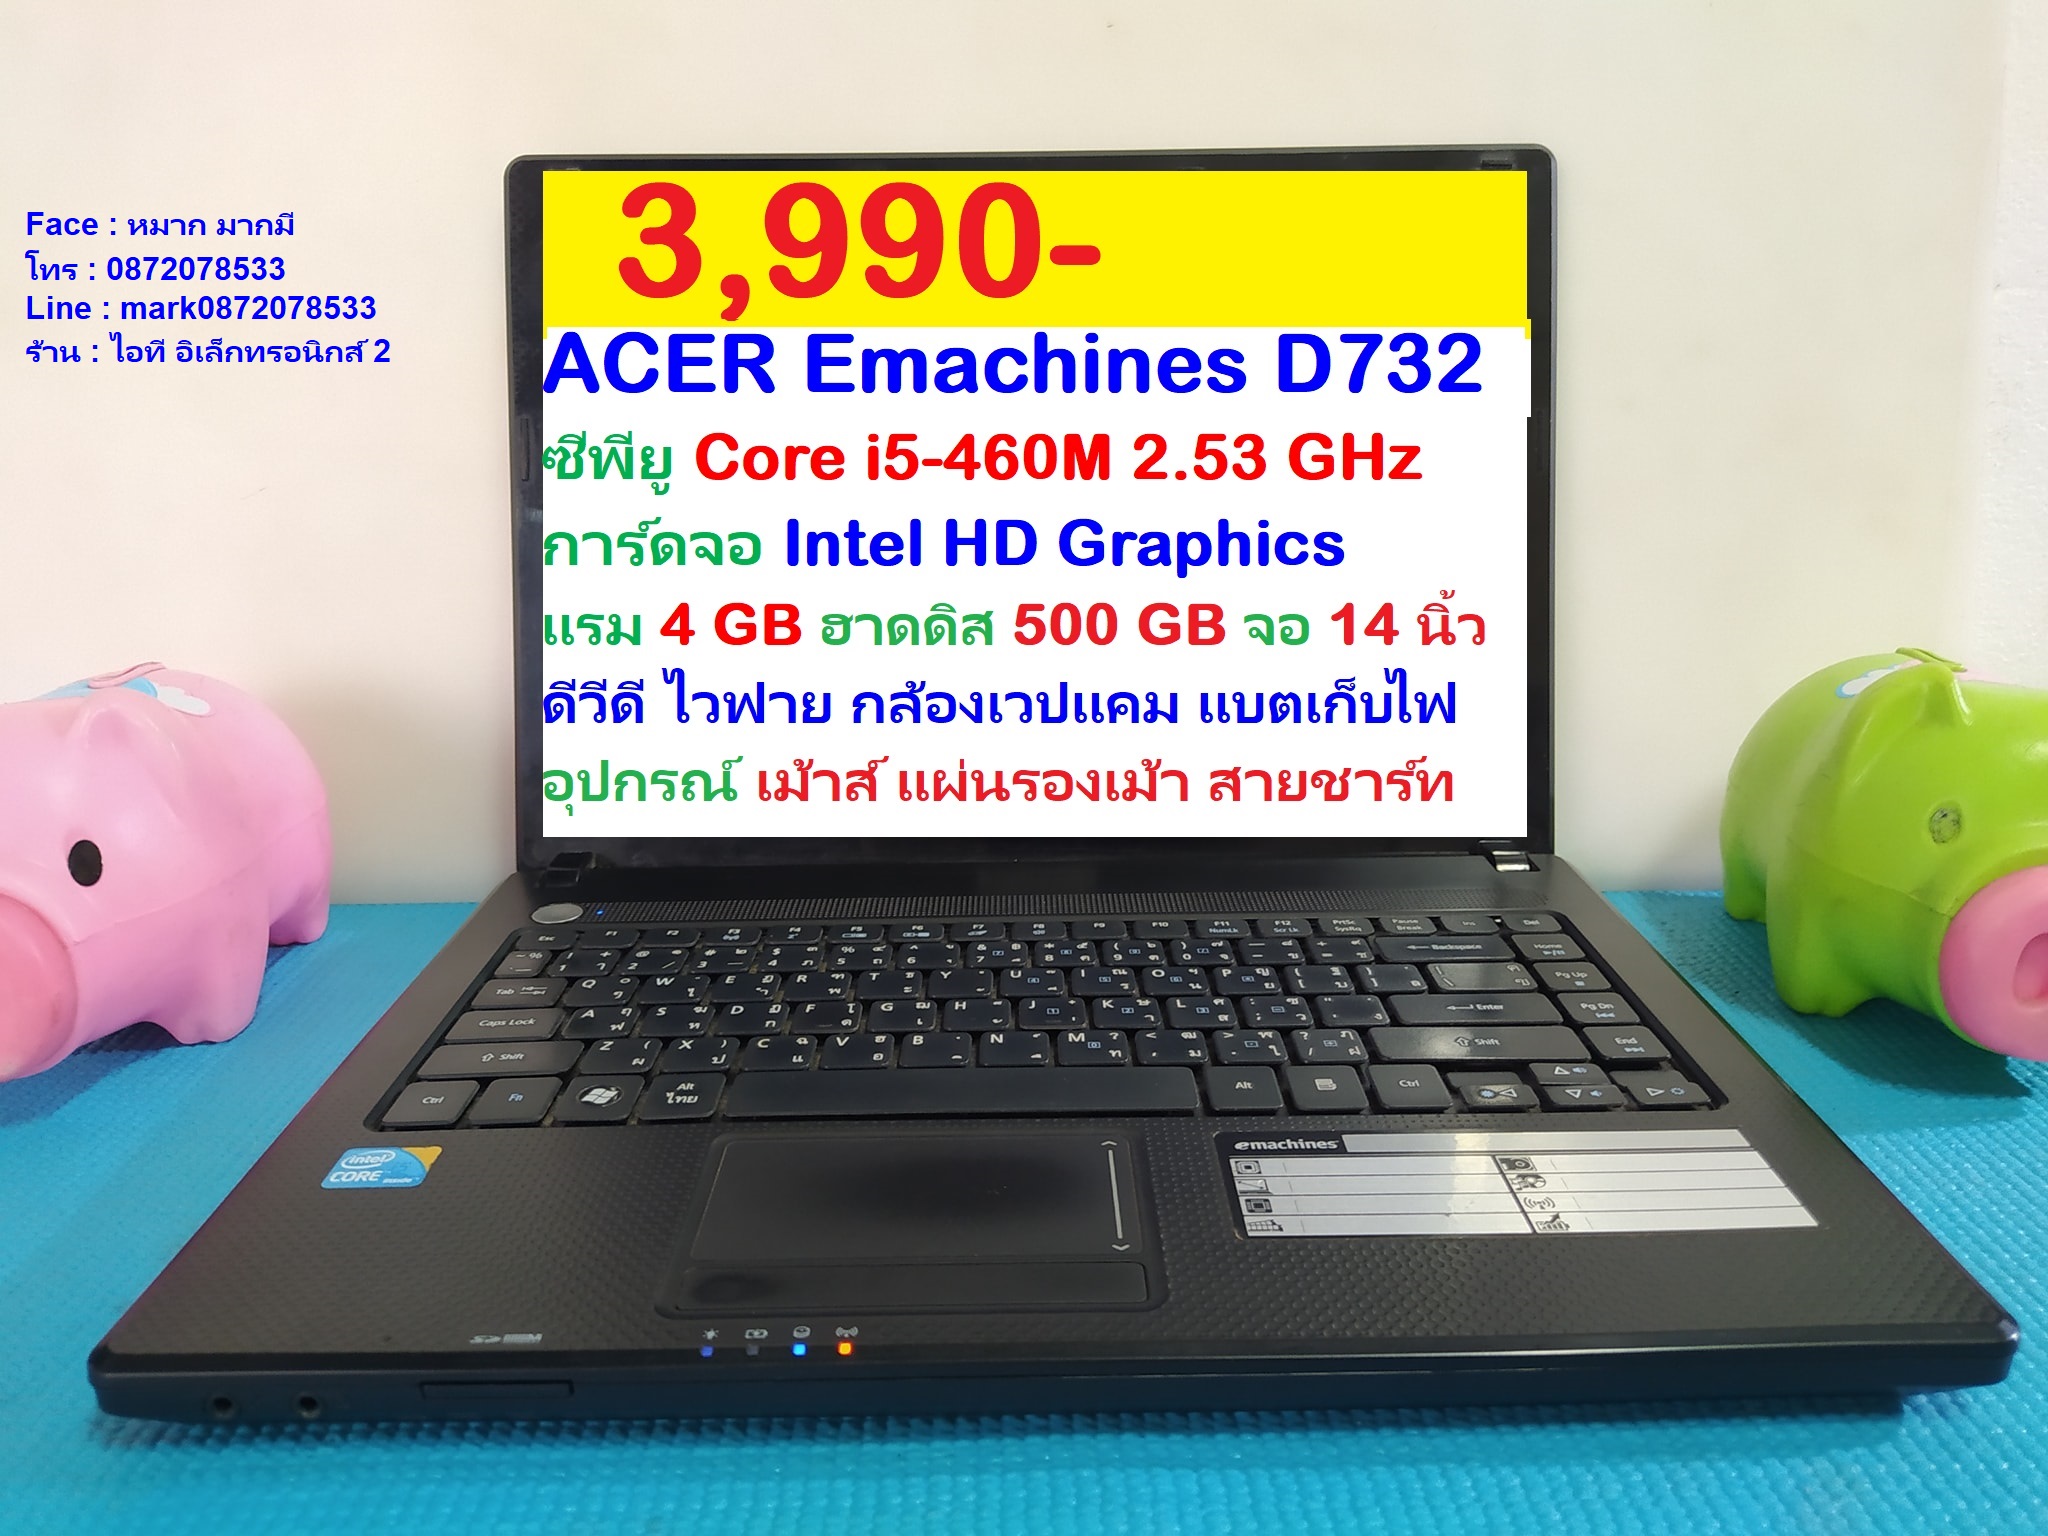 ACER Emachines D732 Core i5-460M รูปที่ 1